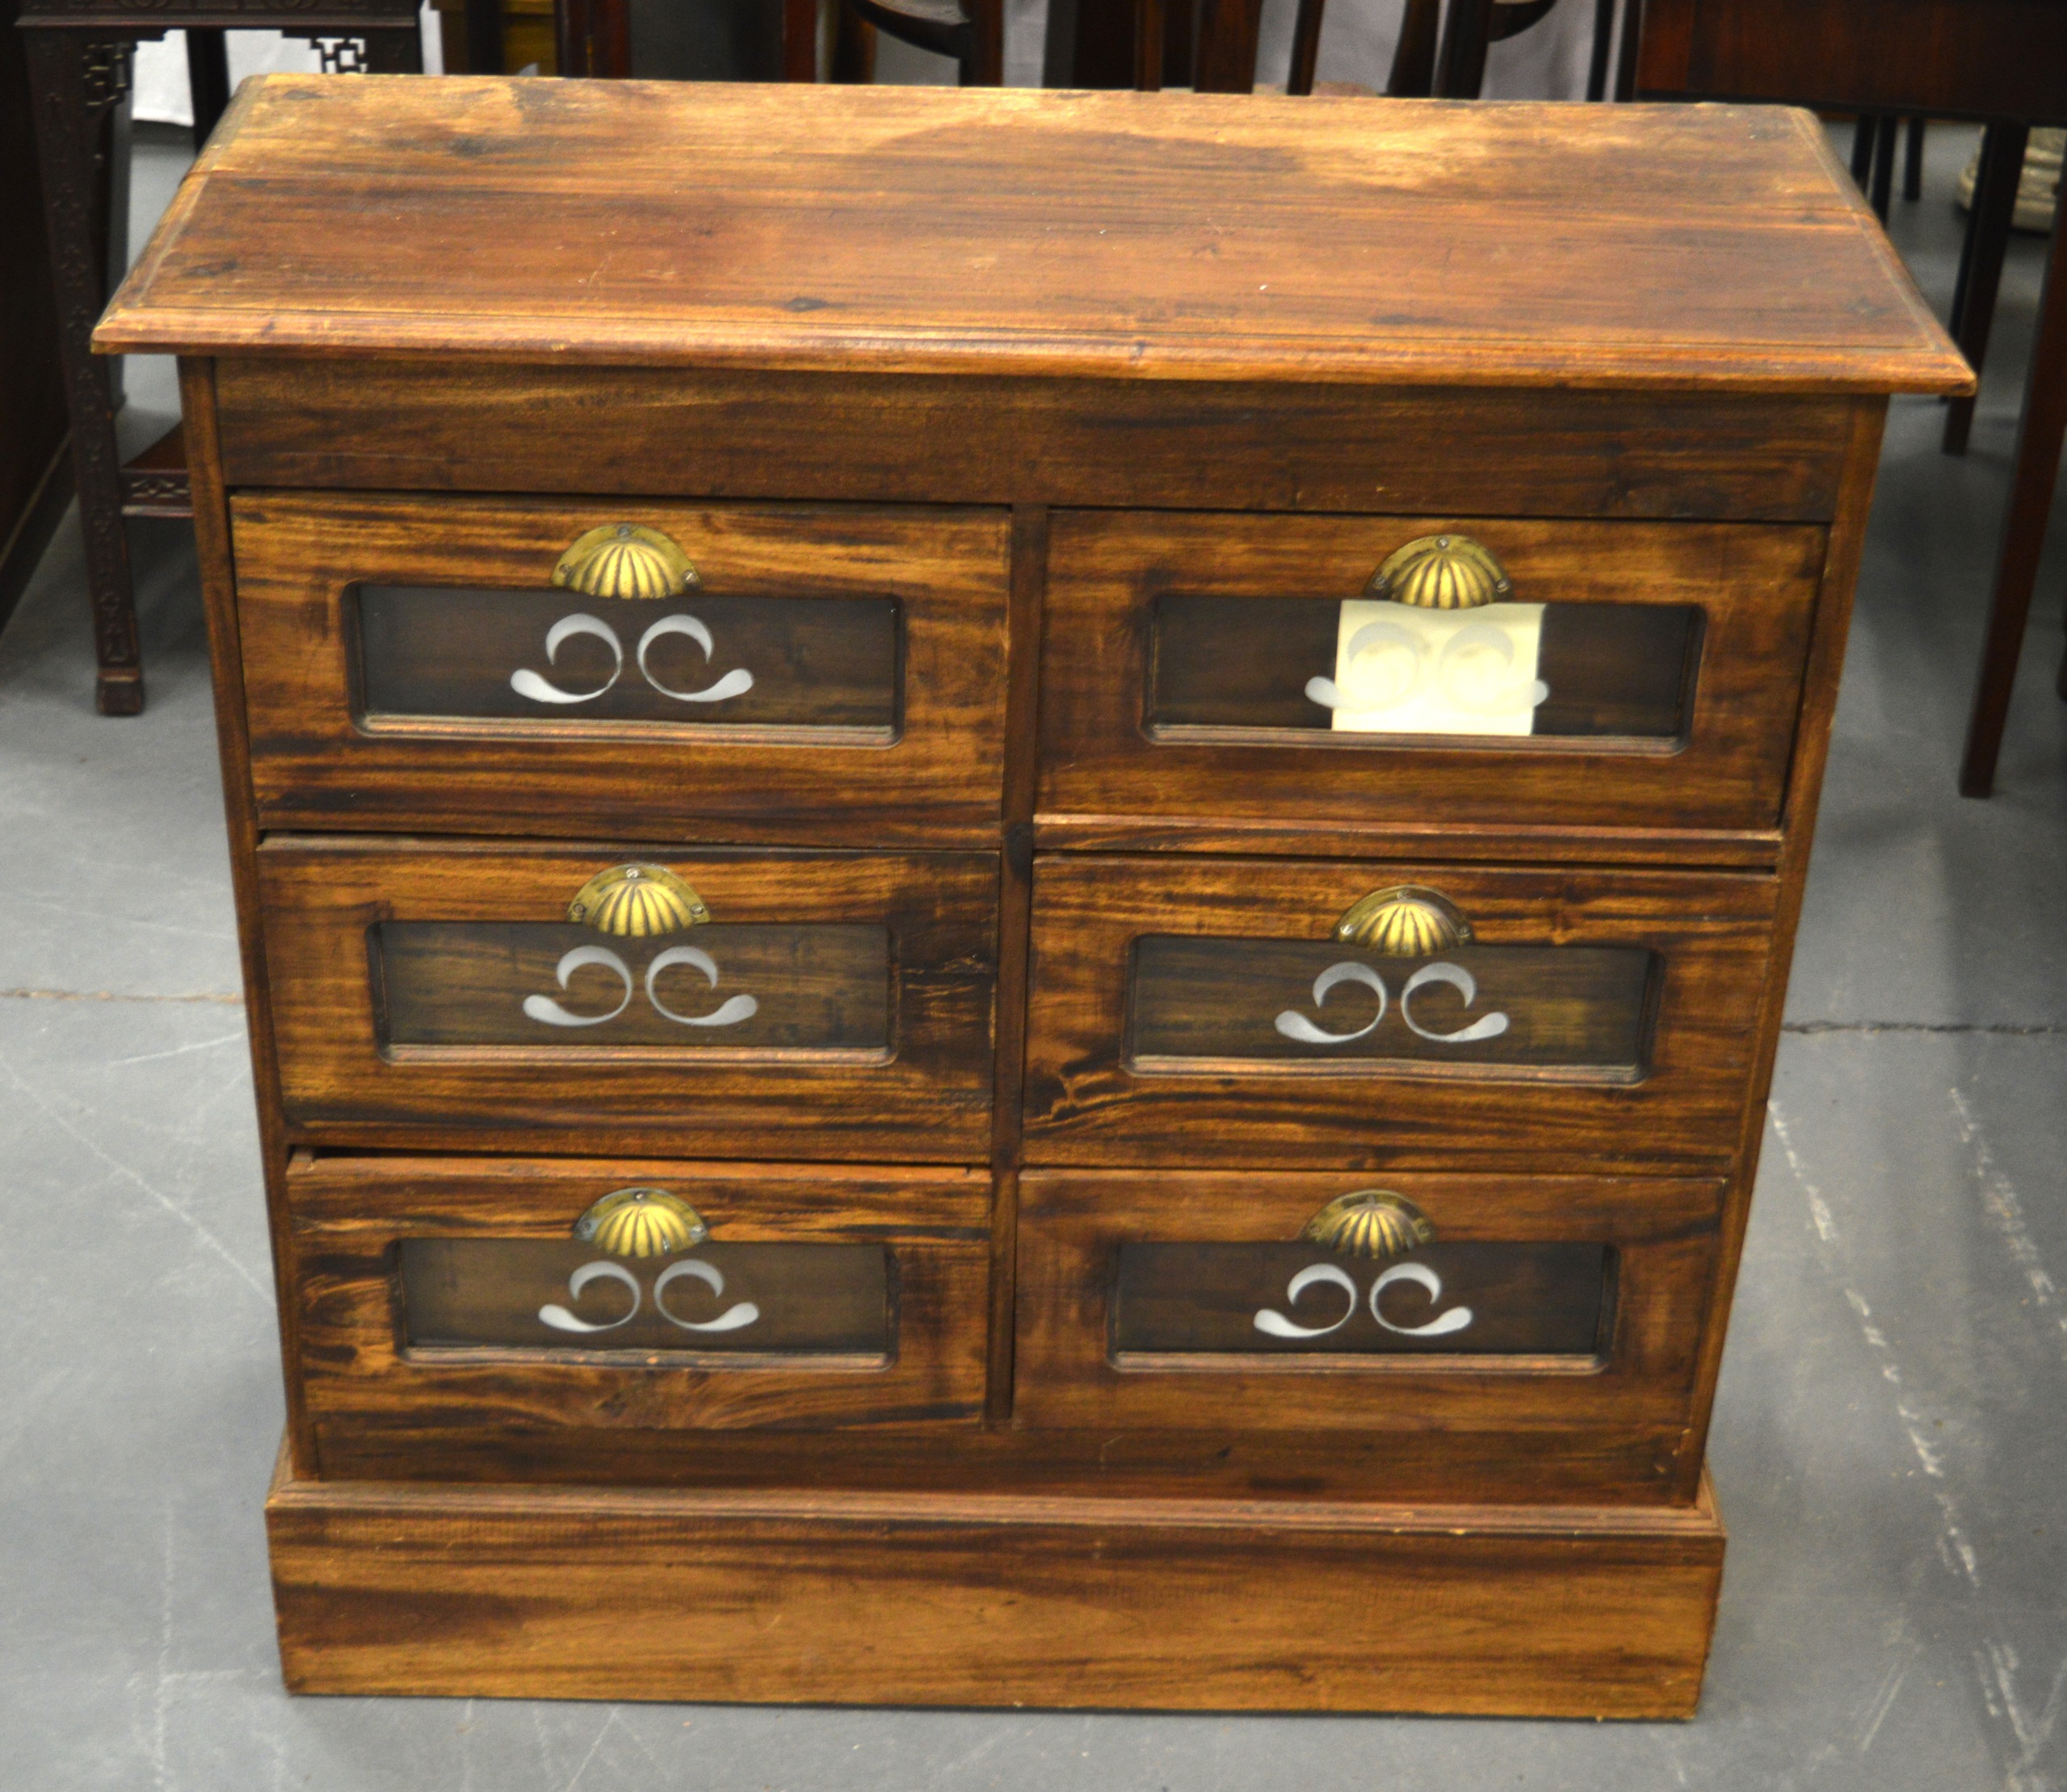 A MAHOGANY GLASS FRONT SHOP SIPLAY CHEST OF DRAWERS. 3 ft x 2 ft 11ins.